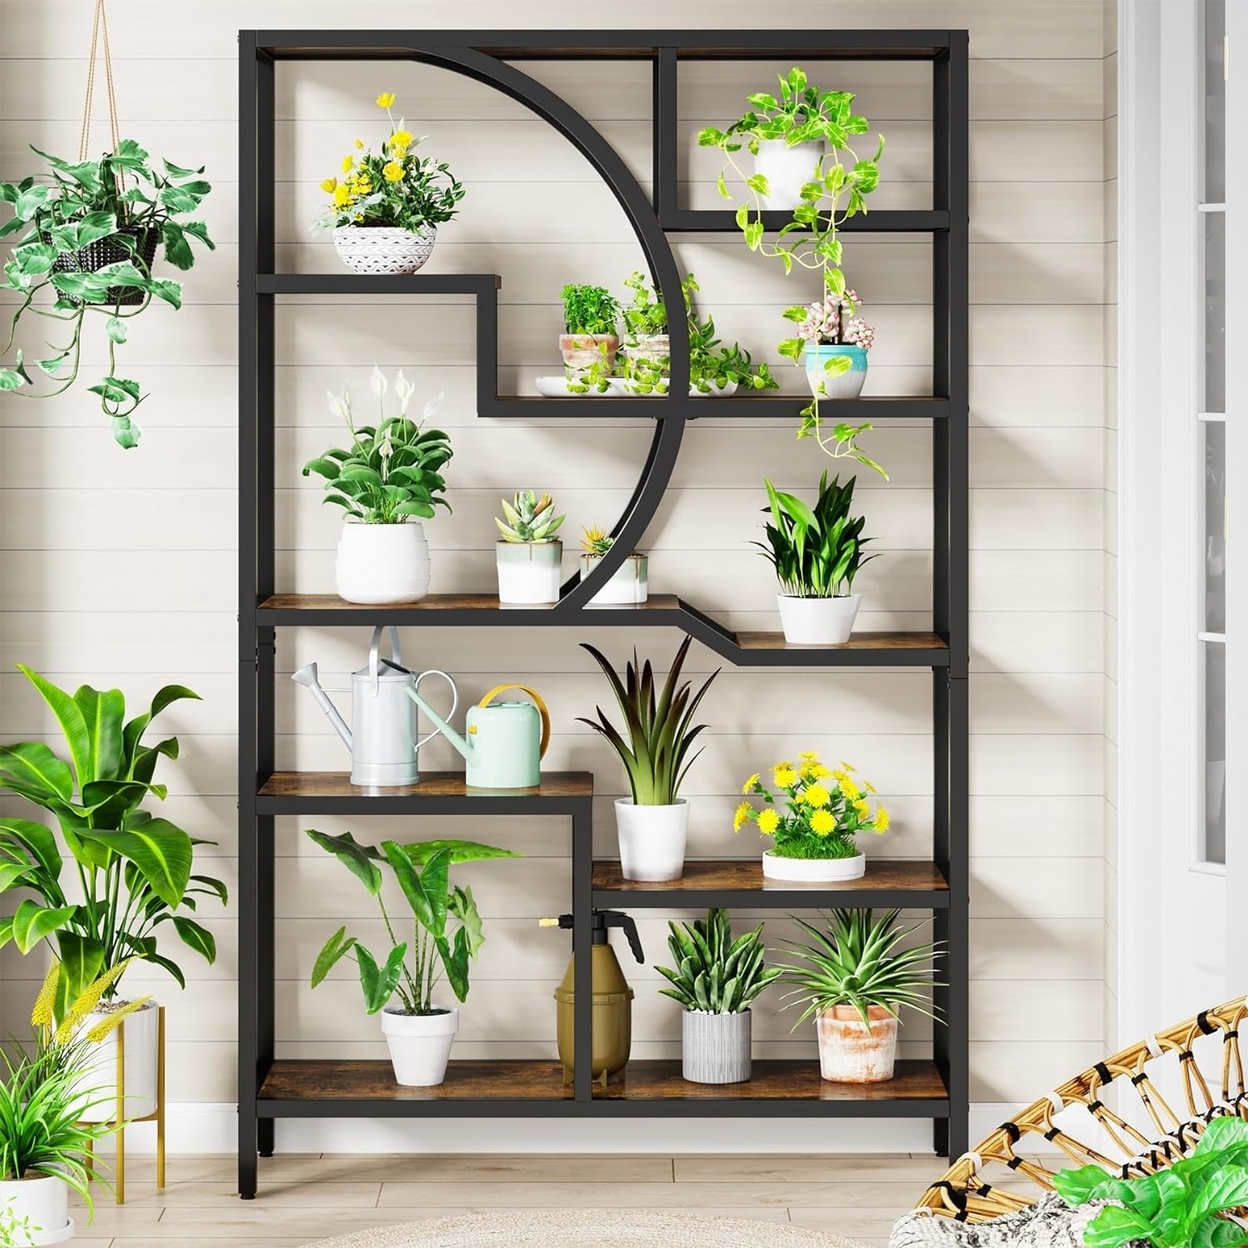 Tribesigns 69 Tall Bookshelf, Industrial 6-Tier Etagere Bookcase, Freestanding Open Storage Display Shelving Unit With 9 Open Shelves - 2pc